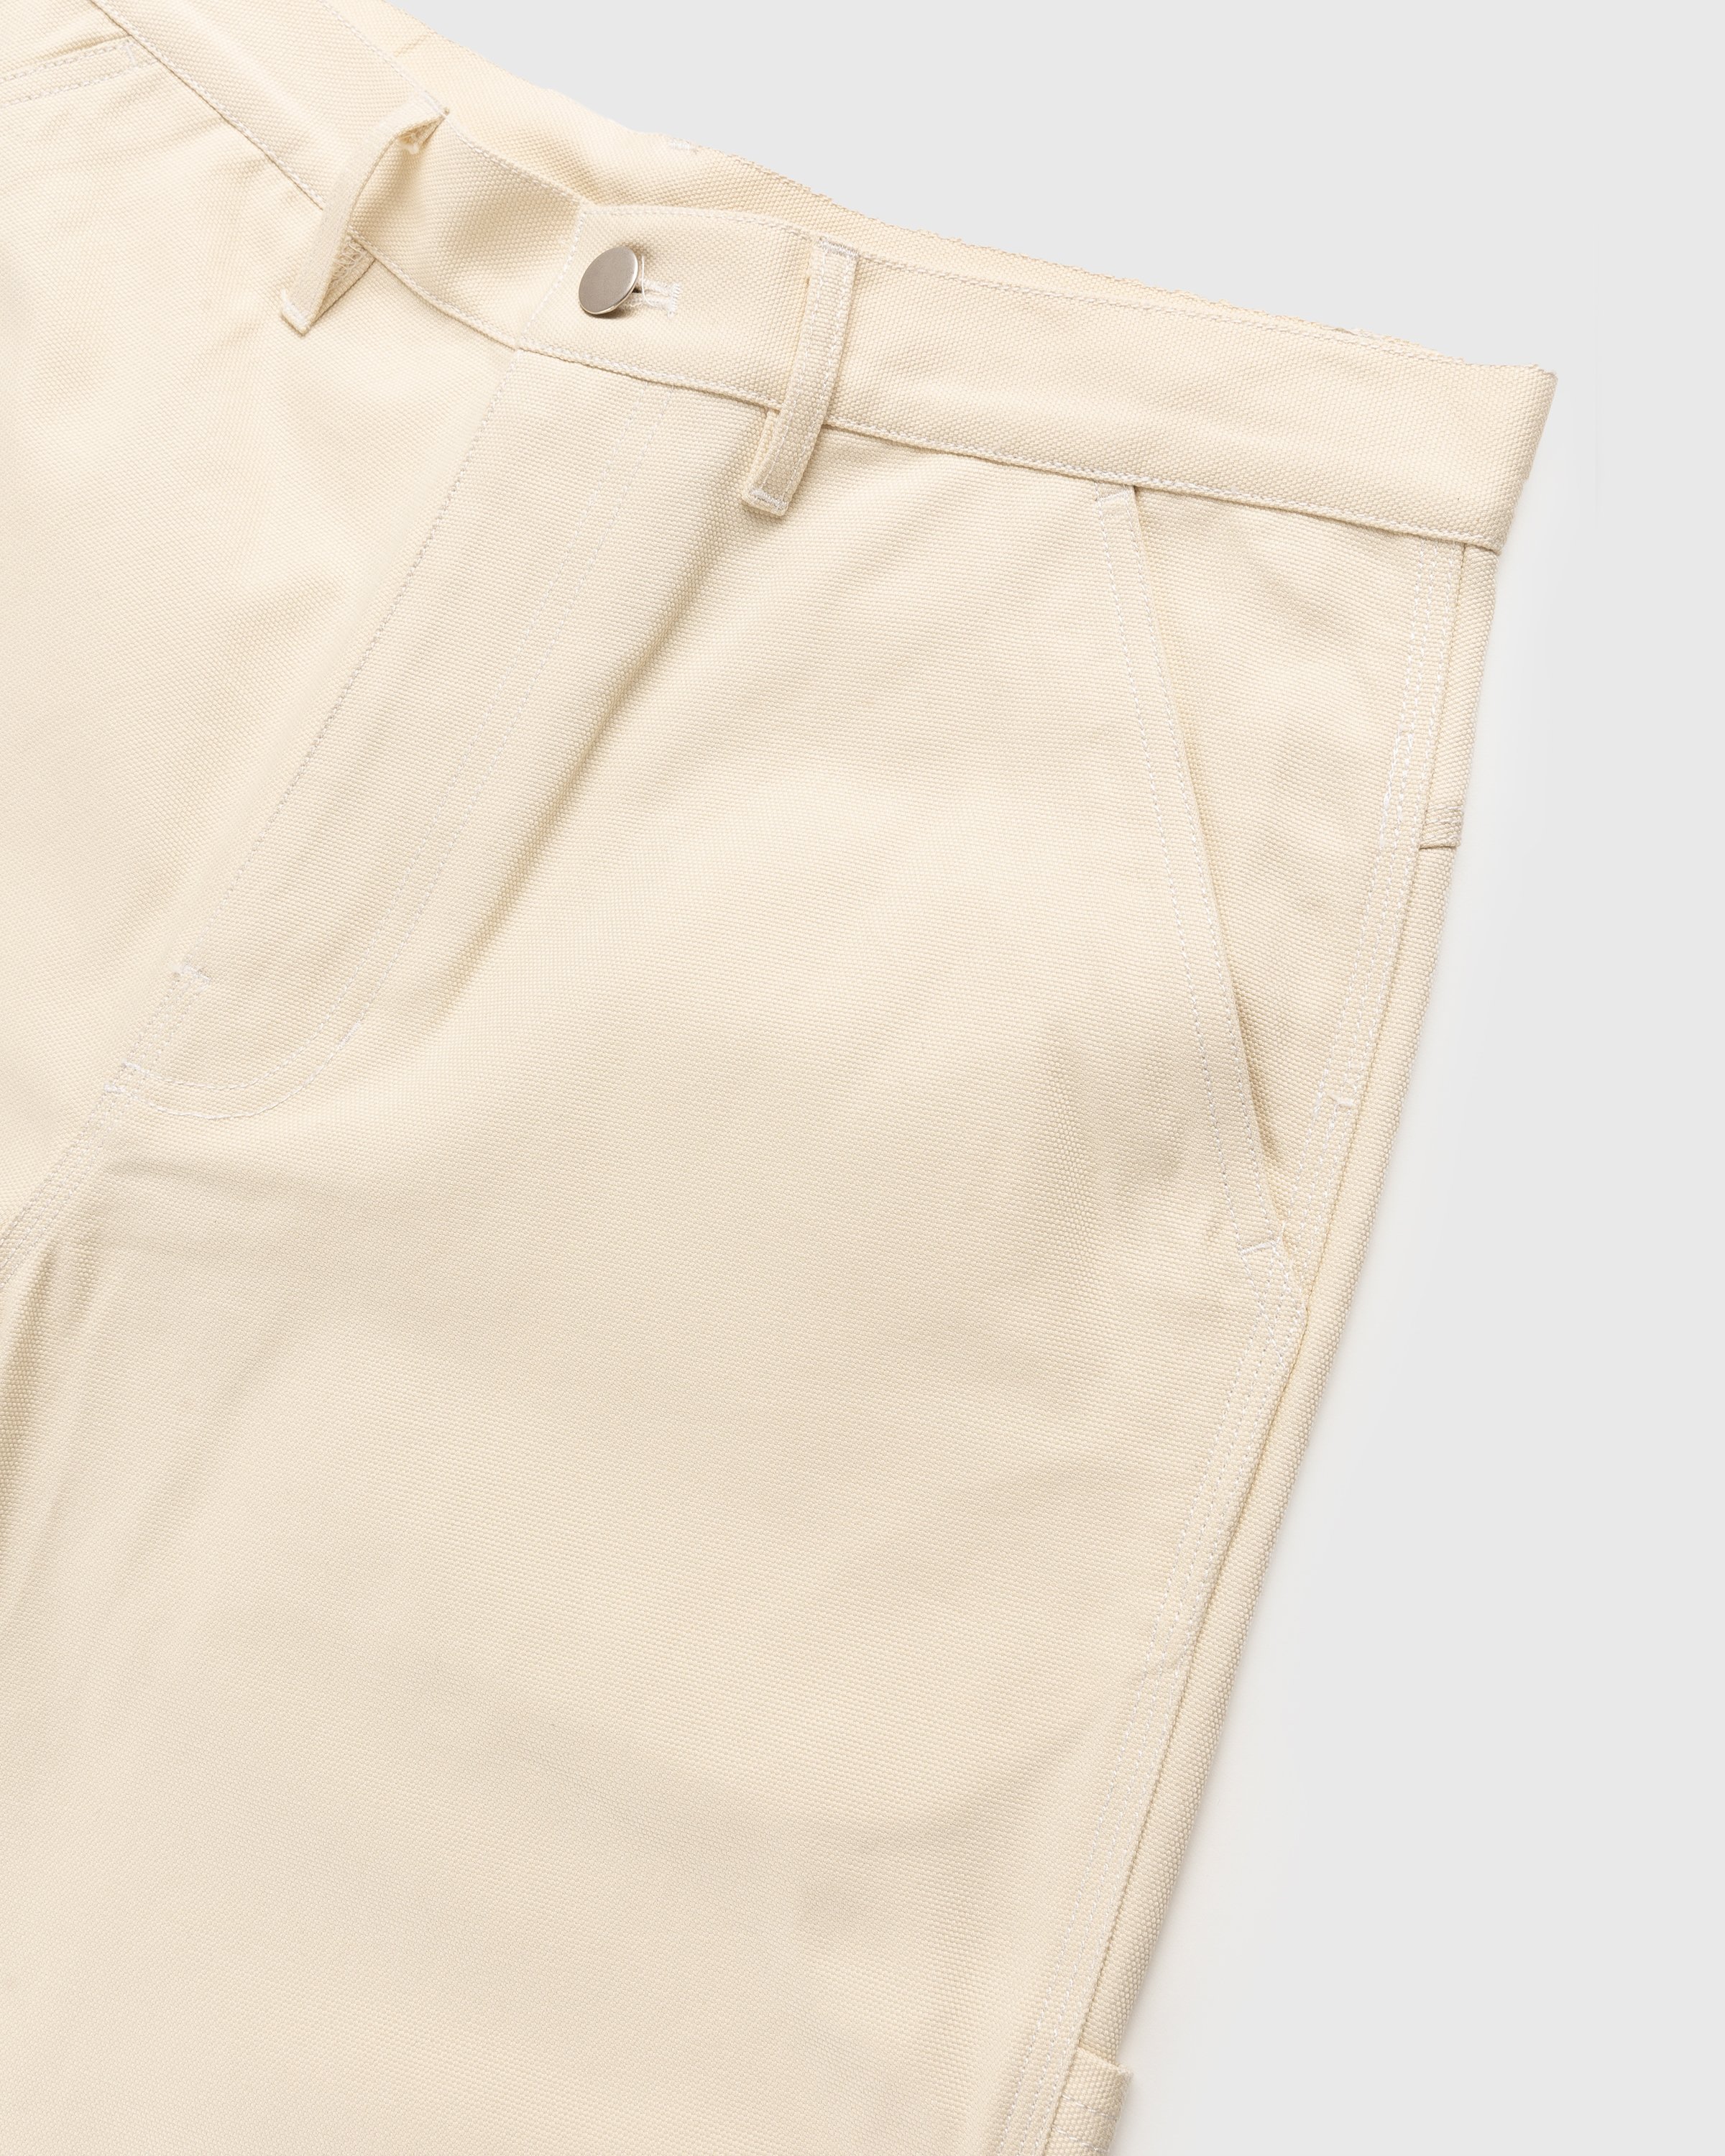 RUF x Highsnobiety - Cotton Work Pants Natural - Clothing - Beige - Image 4